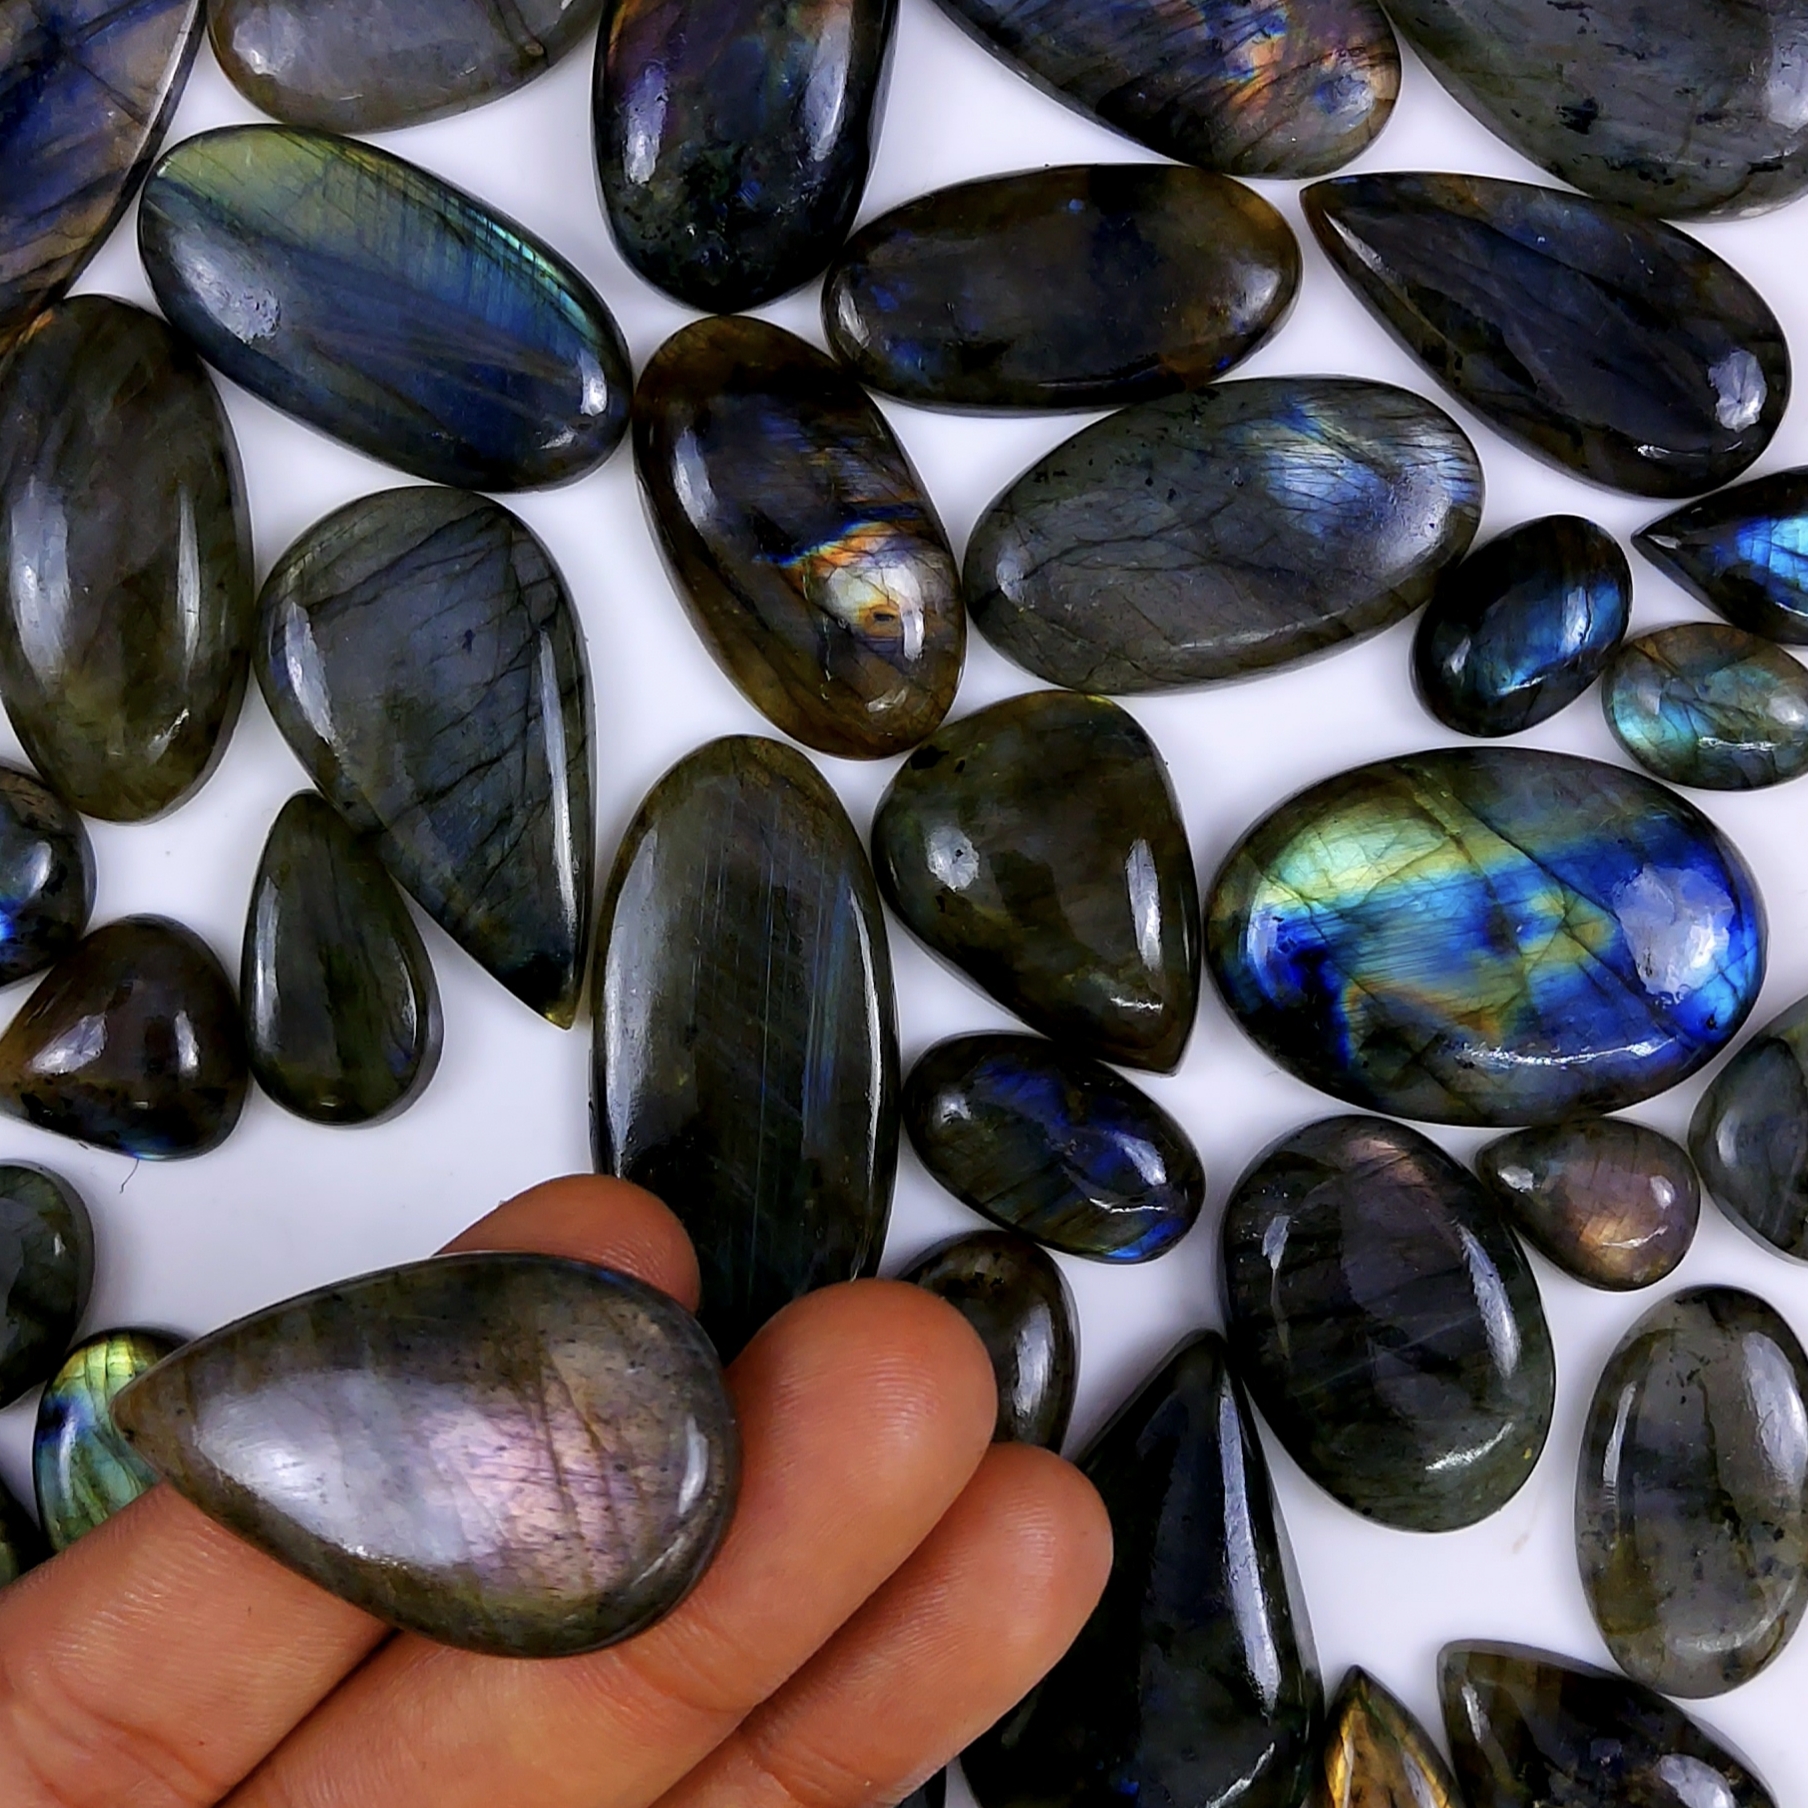 39pc 1562Cts Labradorite Cabochon Multifire Healing Crystal For Jewelry Supplies, Labradorite Necklace Handmade Wire Wrapped Gemstone Pendant 50x28 18x14mm#6317